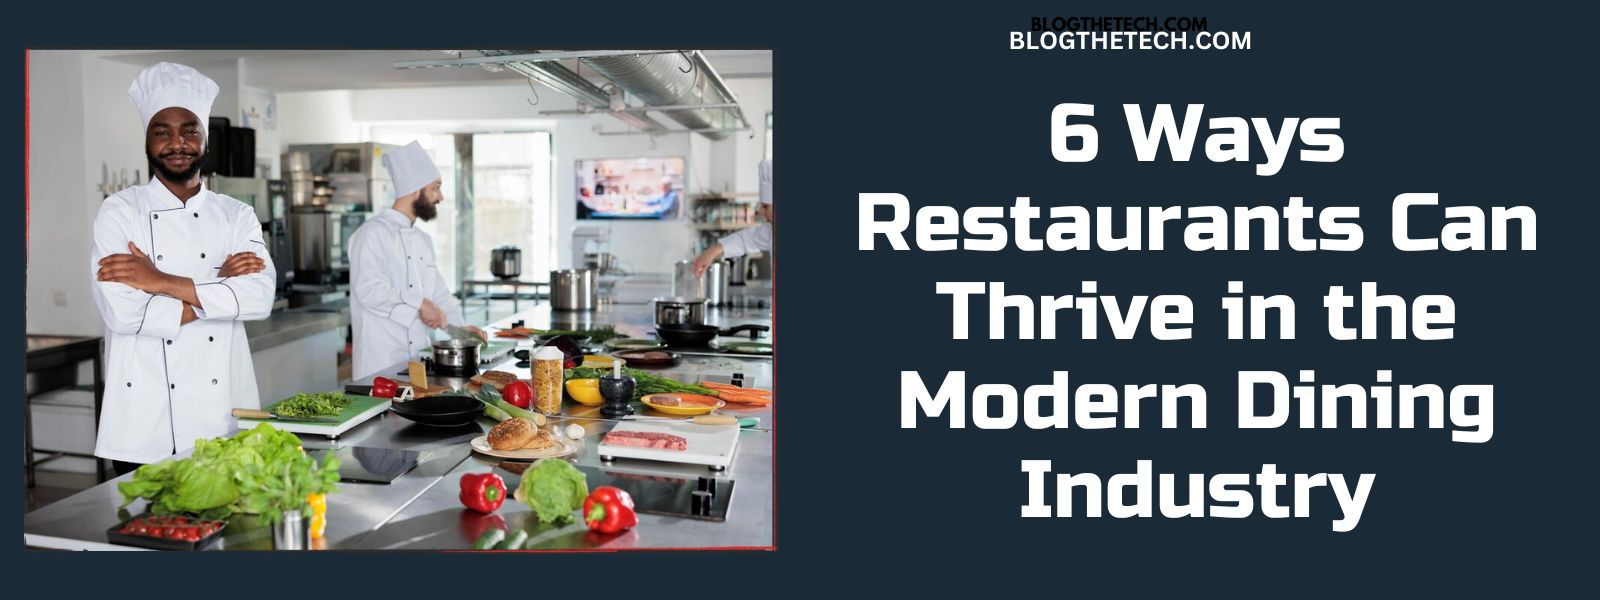 Ways-Restaurants-Can-Thrive-in-the-Modern-Dining-Industry-Featured